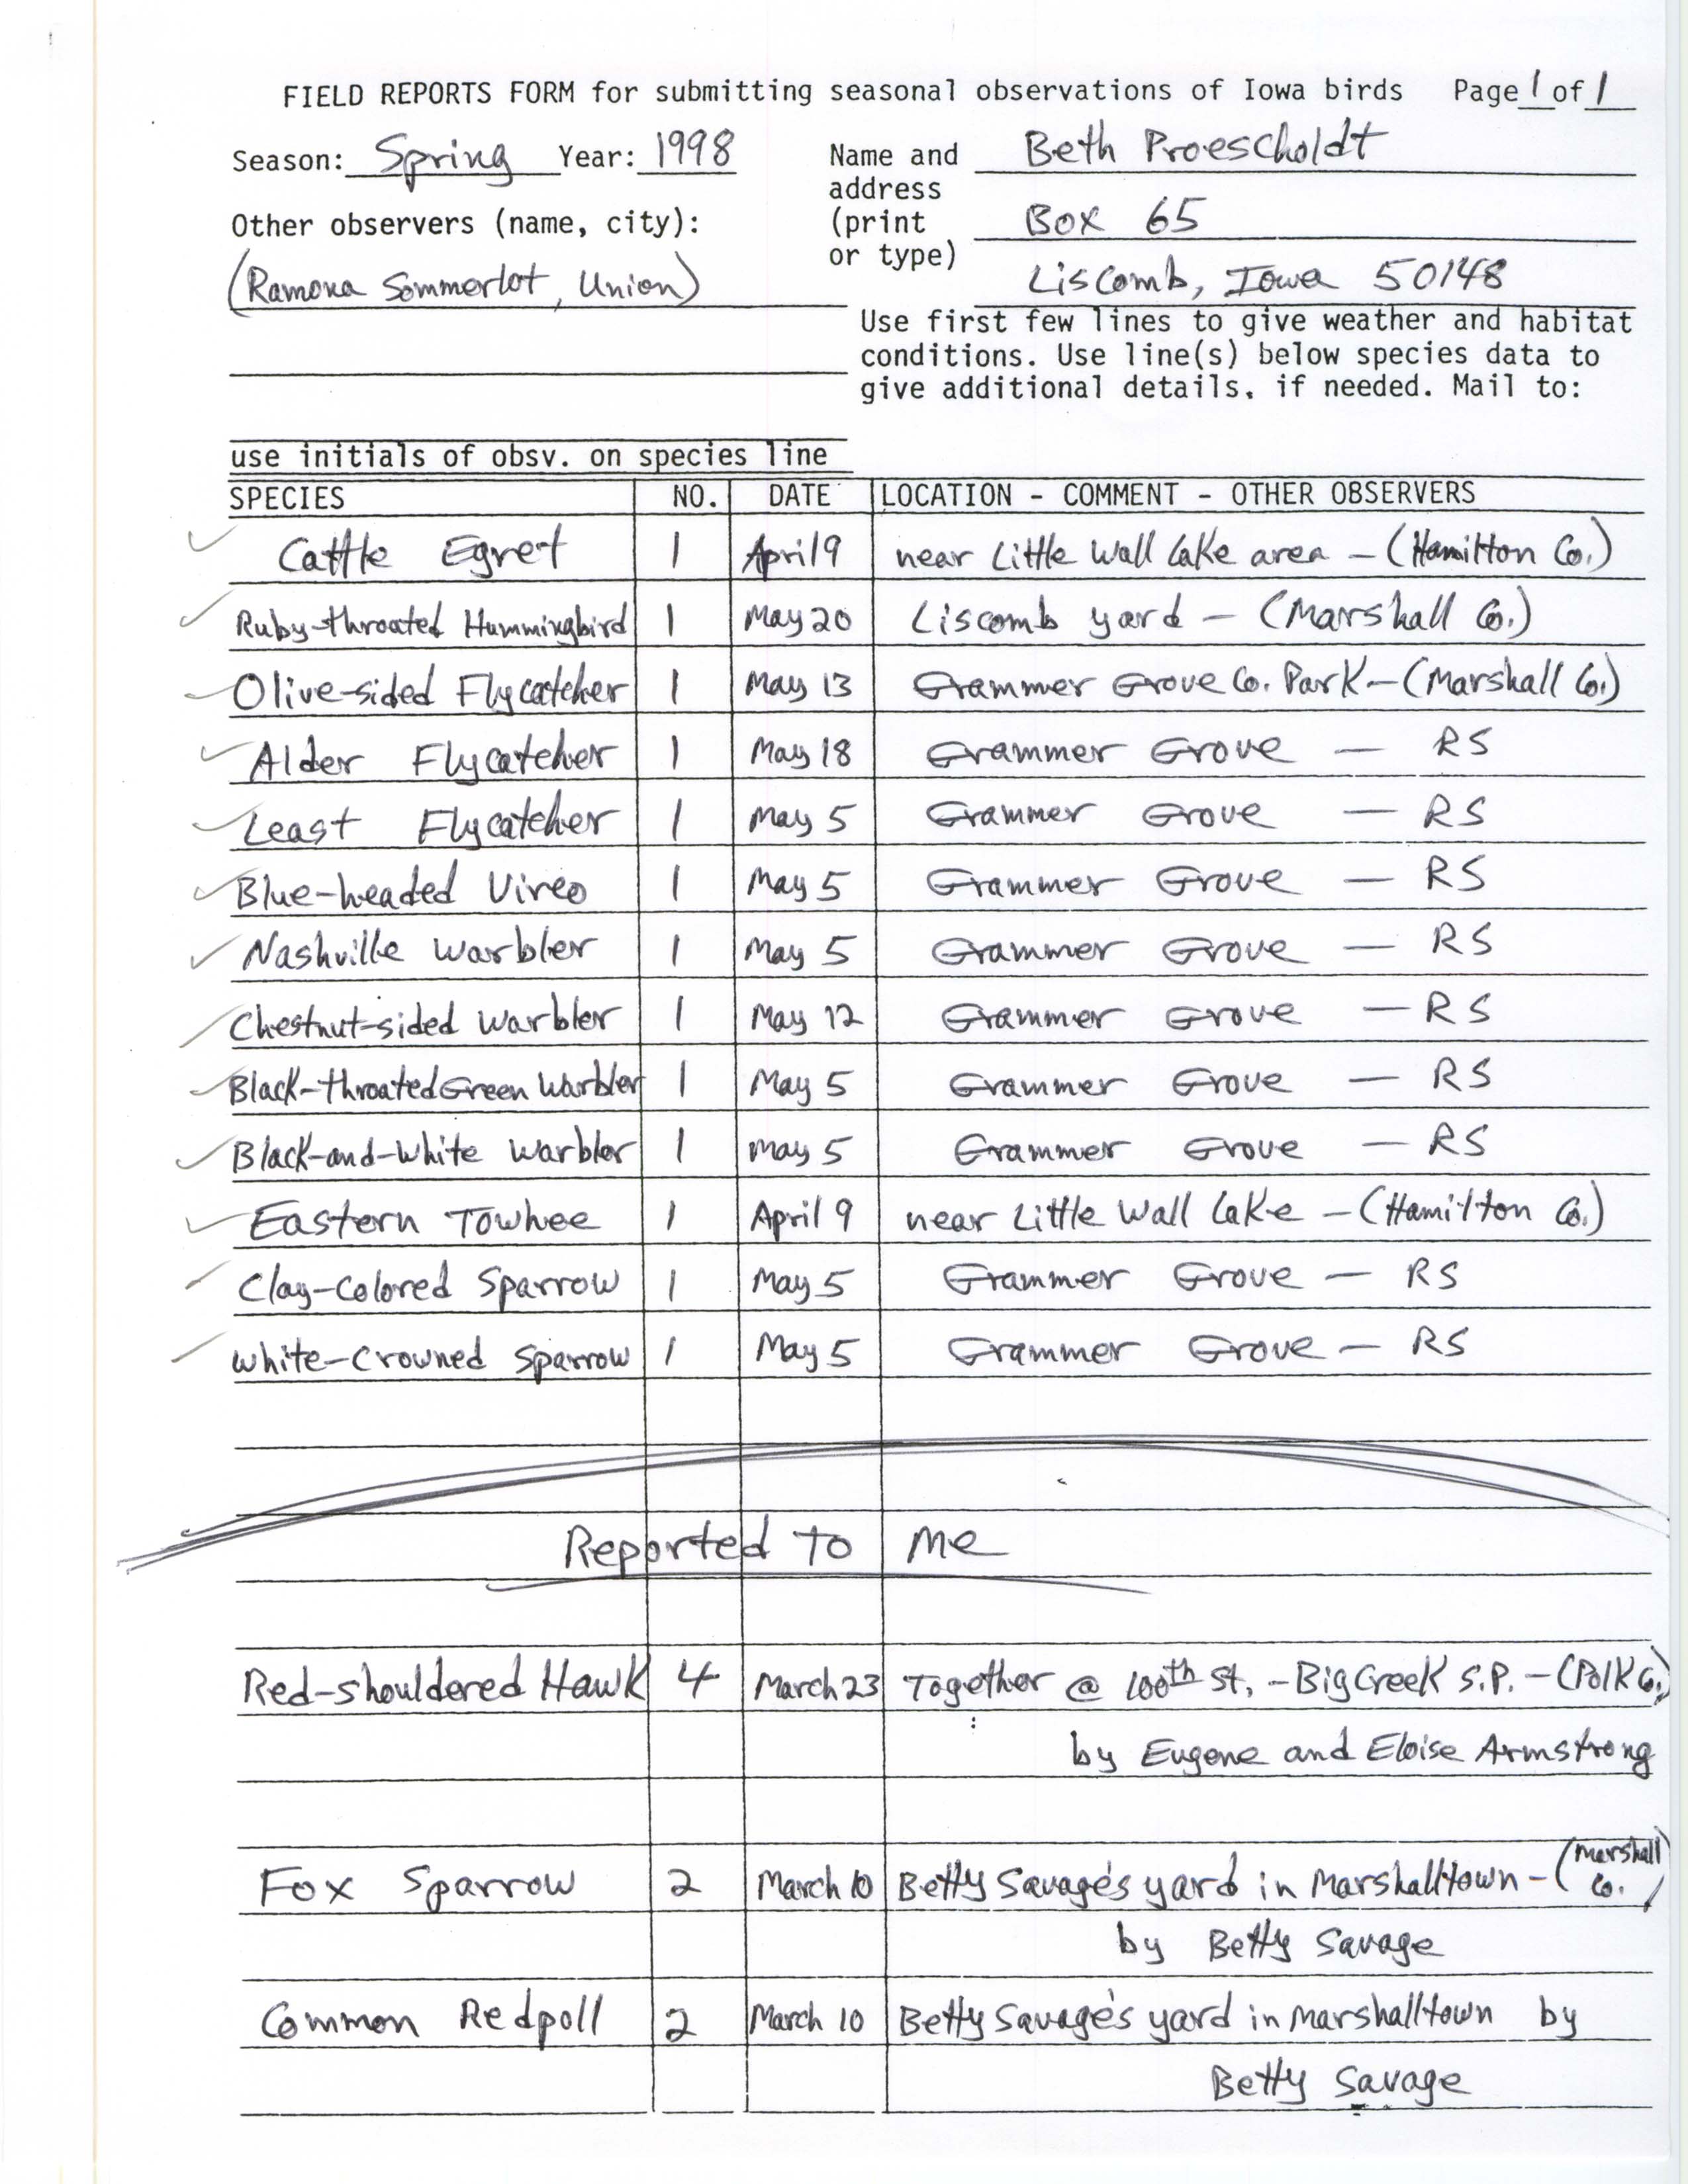 Field reports form for submitting seasonal observations of Iowa birds, Beth Proescholdt, spring 1998